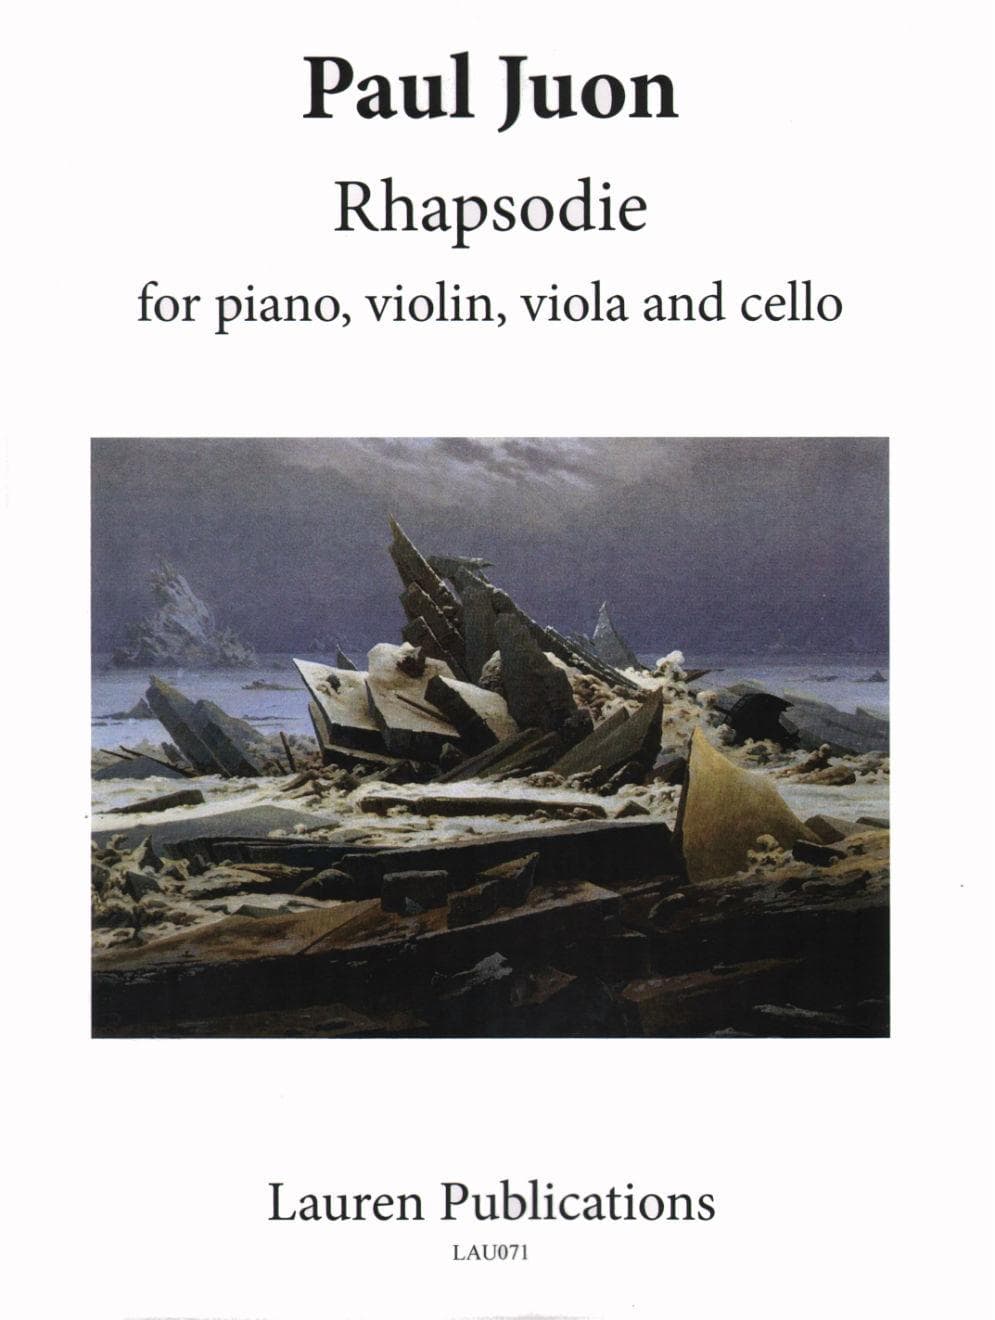 Juon, Paul - Rhapsodie, for Piano Quartet (Violin, Viola, Cello, and Piano) Reprint of the 1907 Schlesinger Edition Published by Lauren Publications